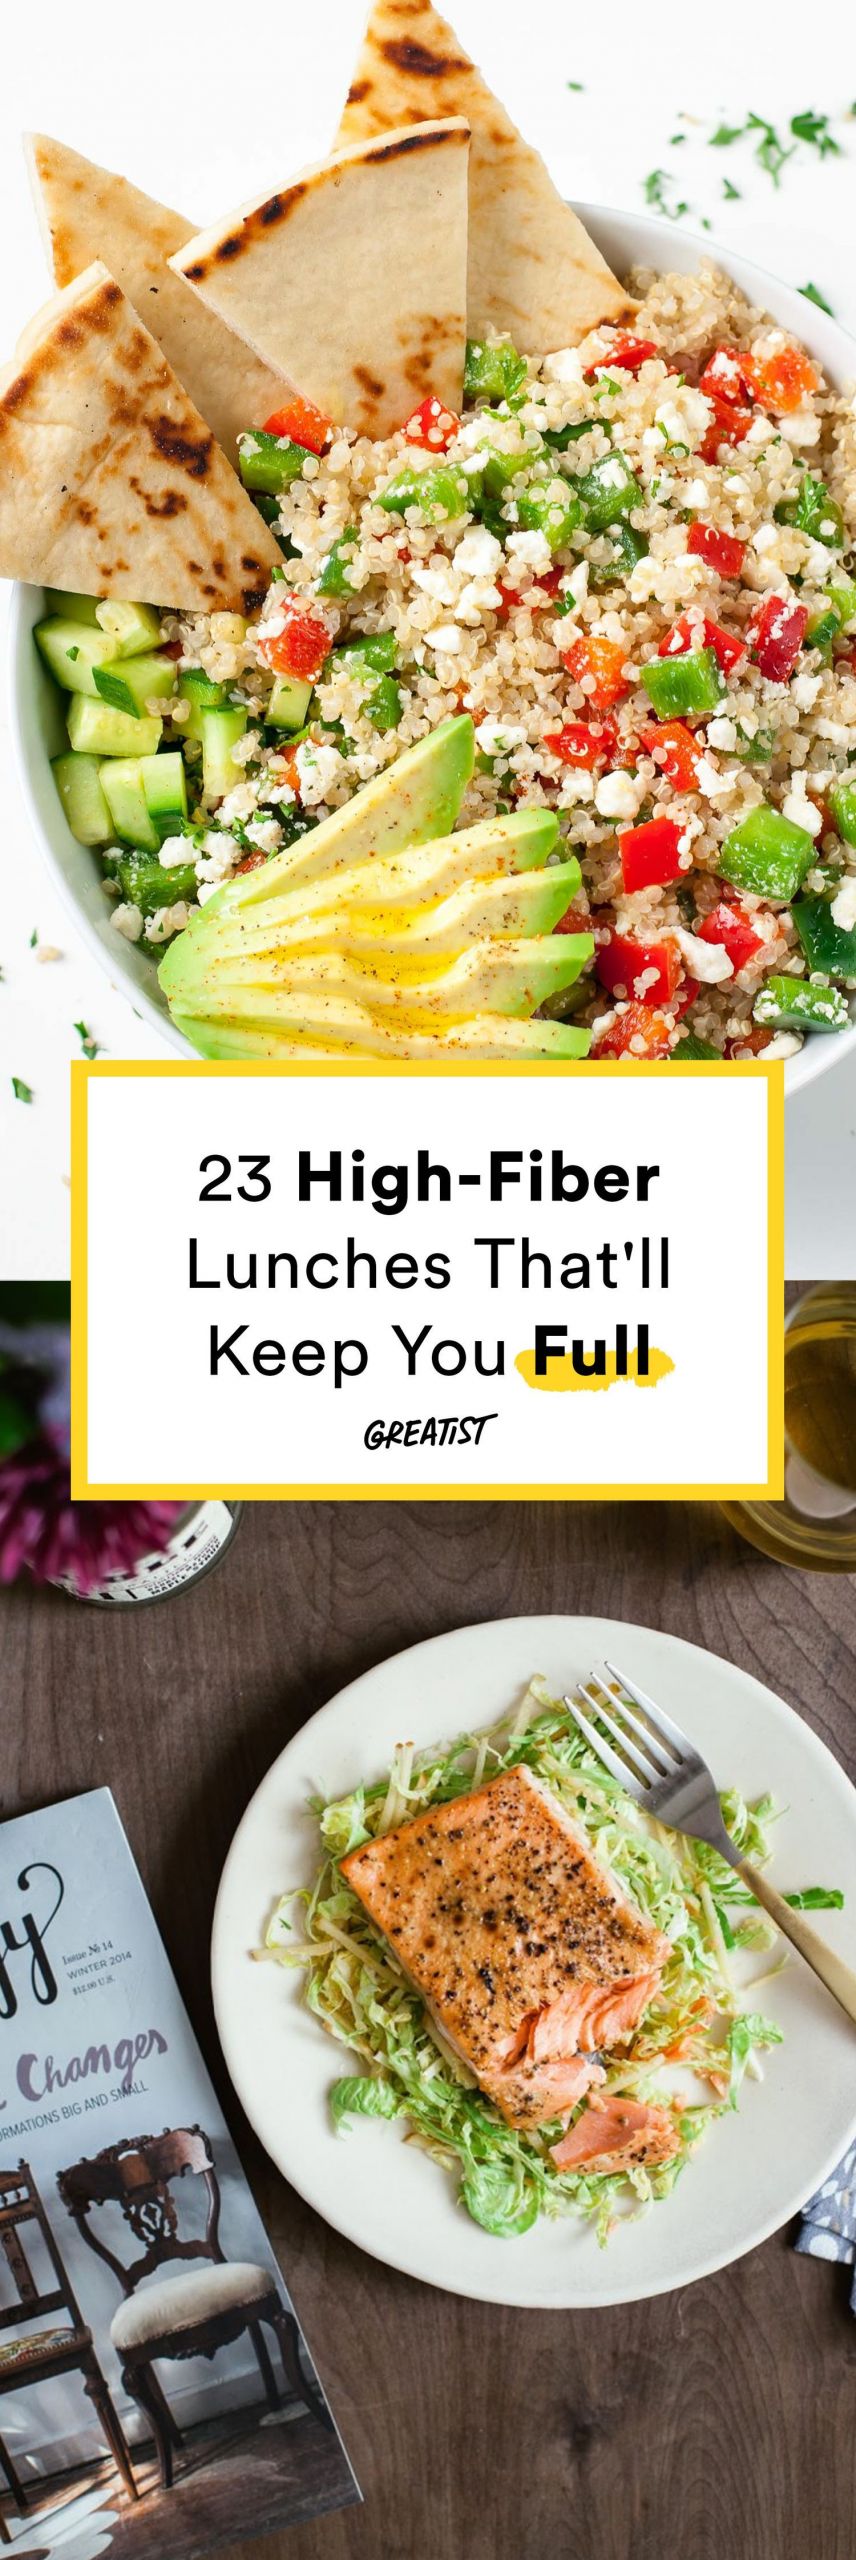 High Fiber Recipes For Lunch
 24 the Best Ideas for High Fiber Recipes for Lunch